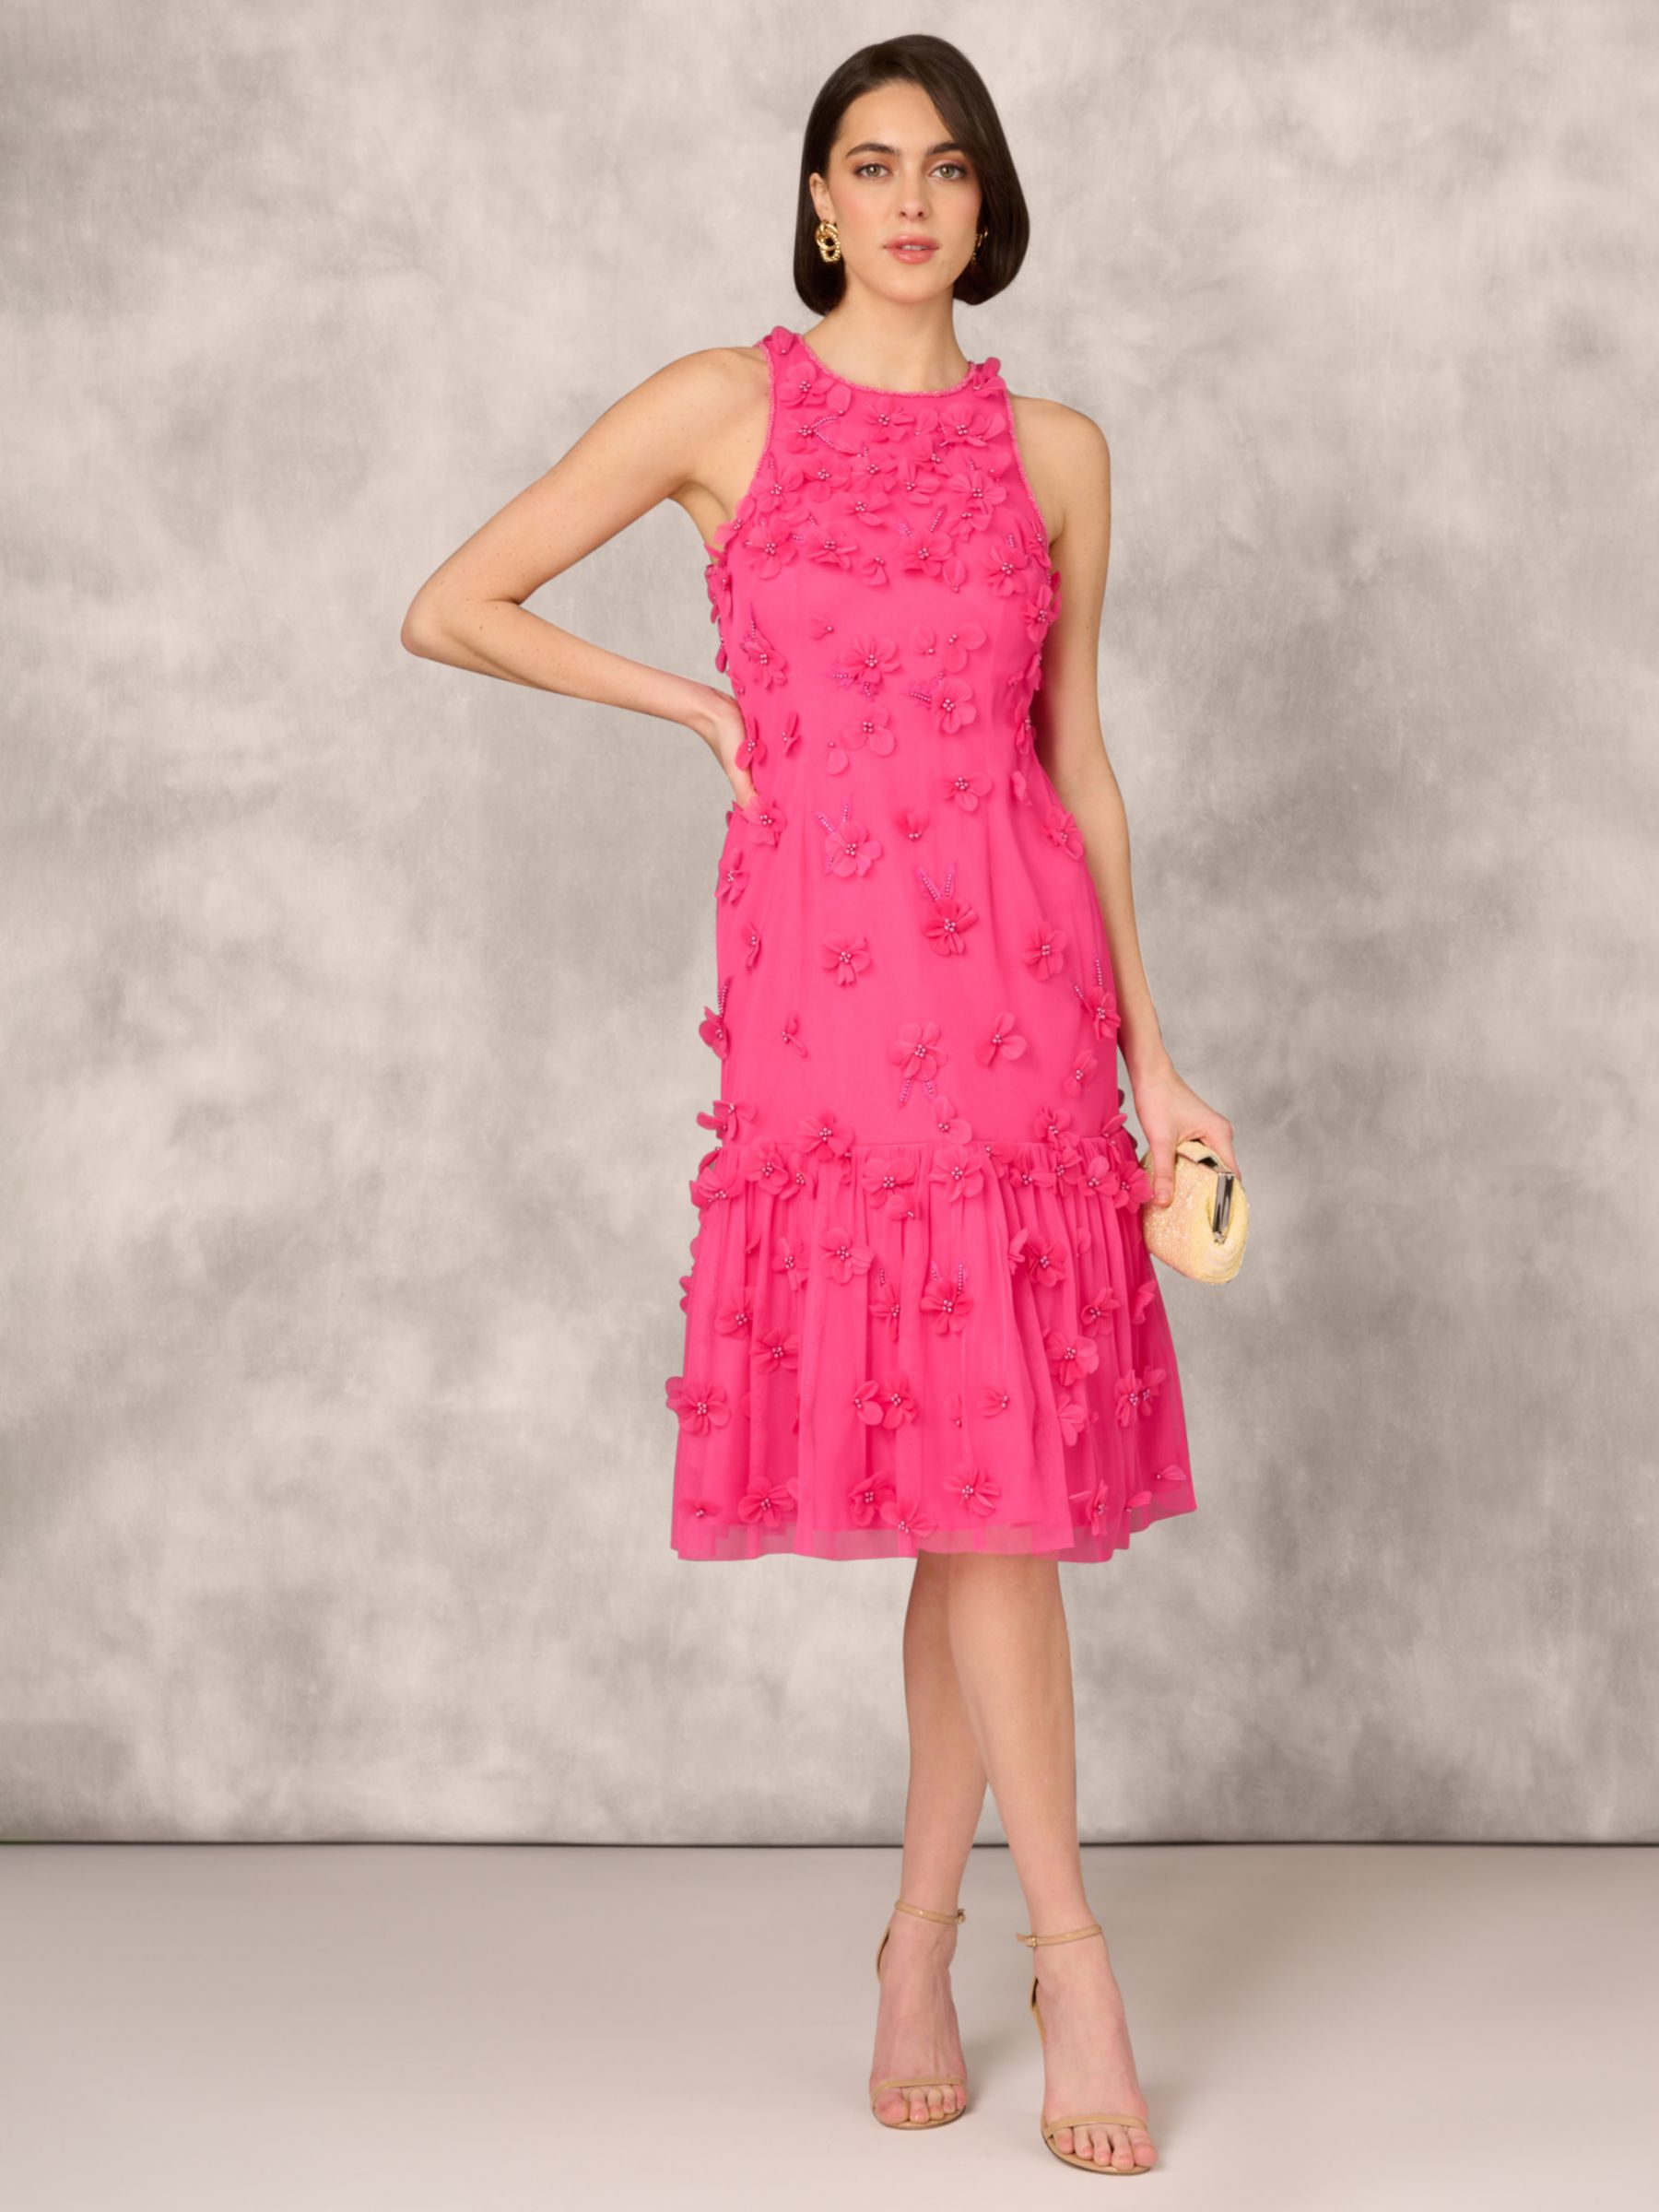 Buy Aidan Mattox by Adrianna Papell Embellishment Cocktail Dress, Electric Pink Online at johnlewis.com